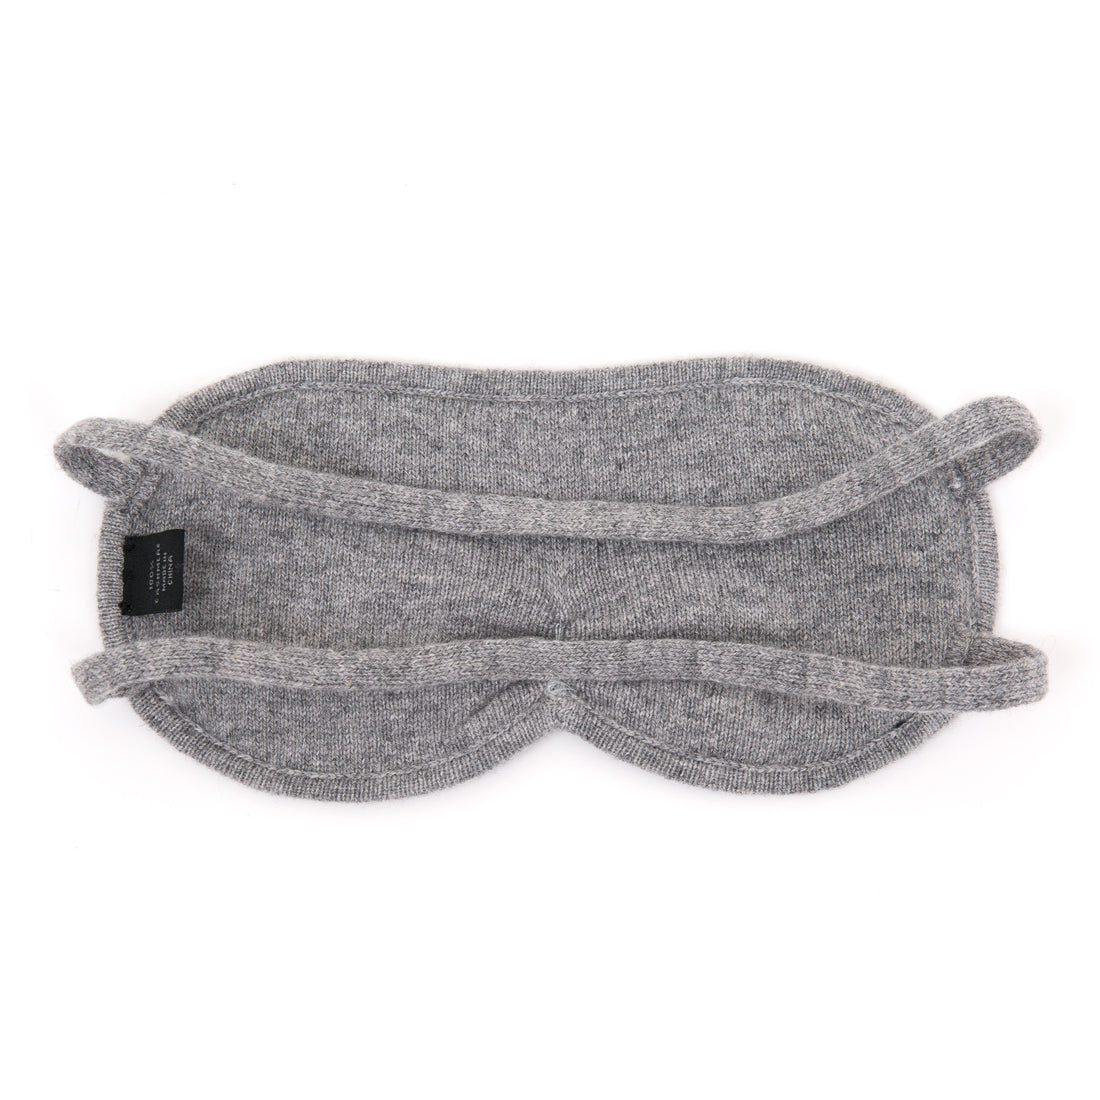 HOME - Lights Out Cashmere Eye Mask